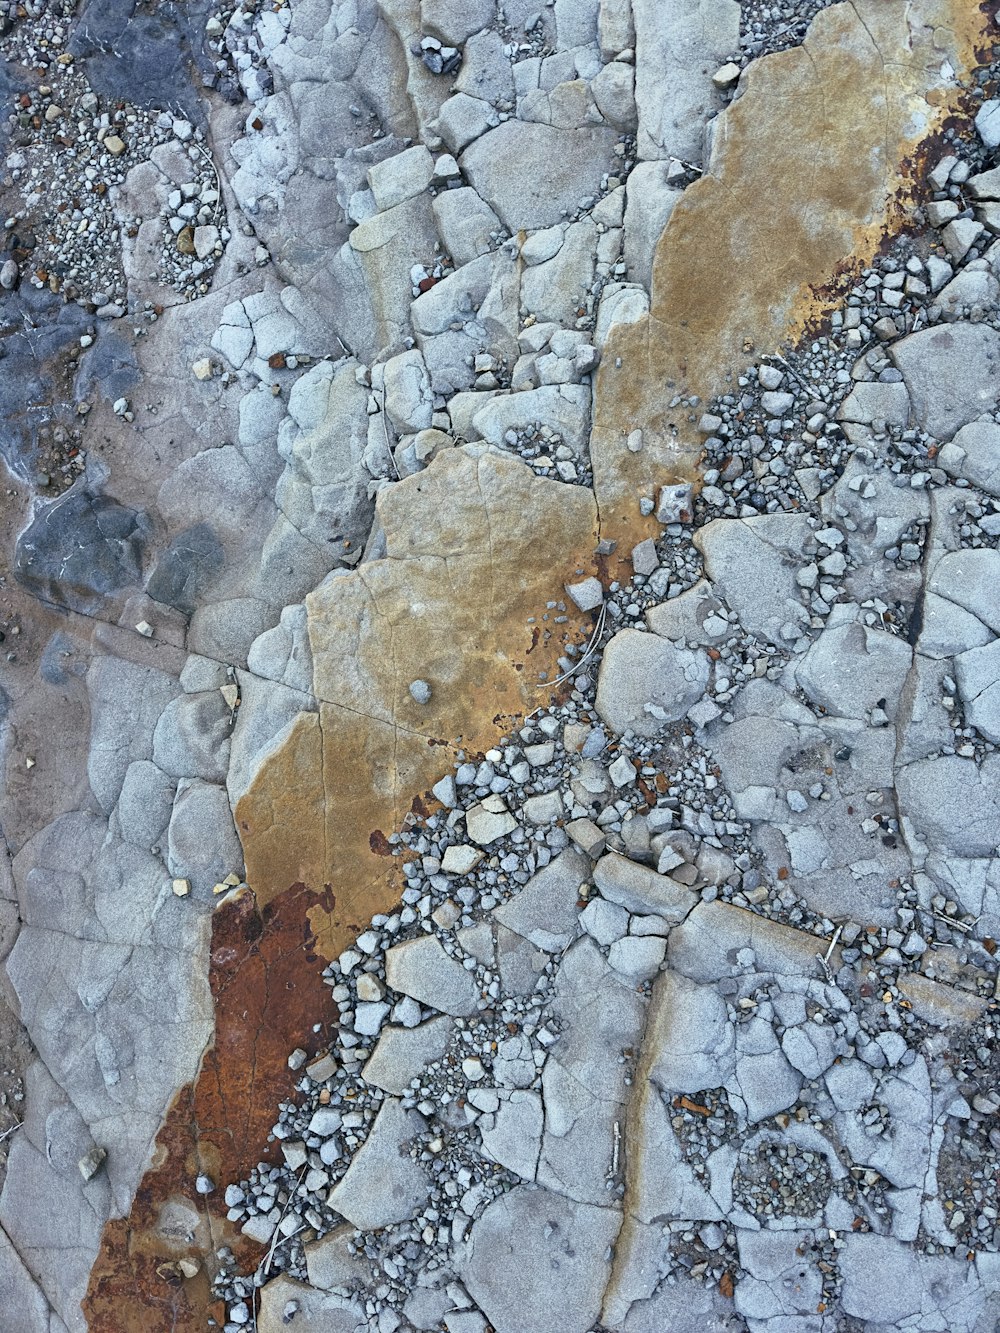 a close up of rocks and gravel with a yellow stripe